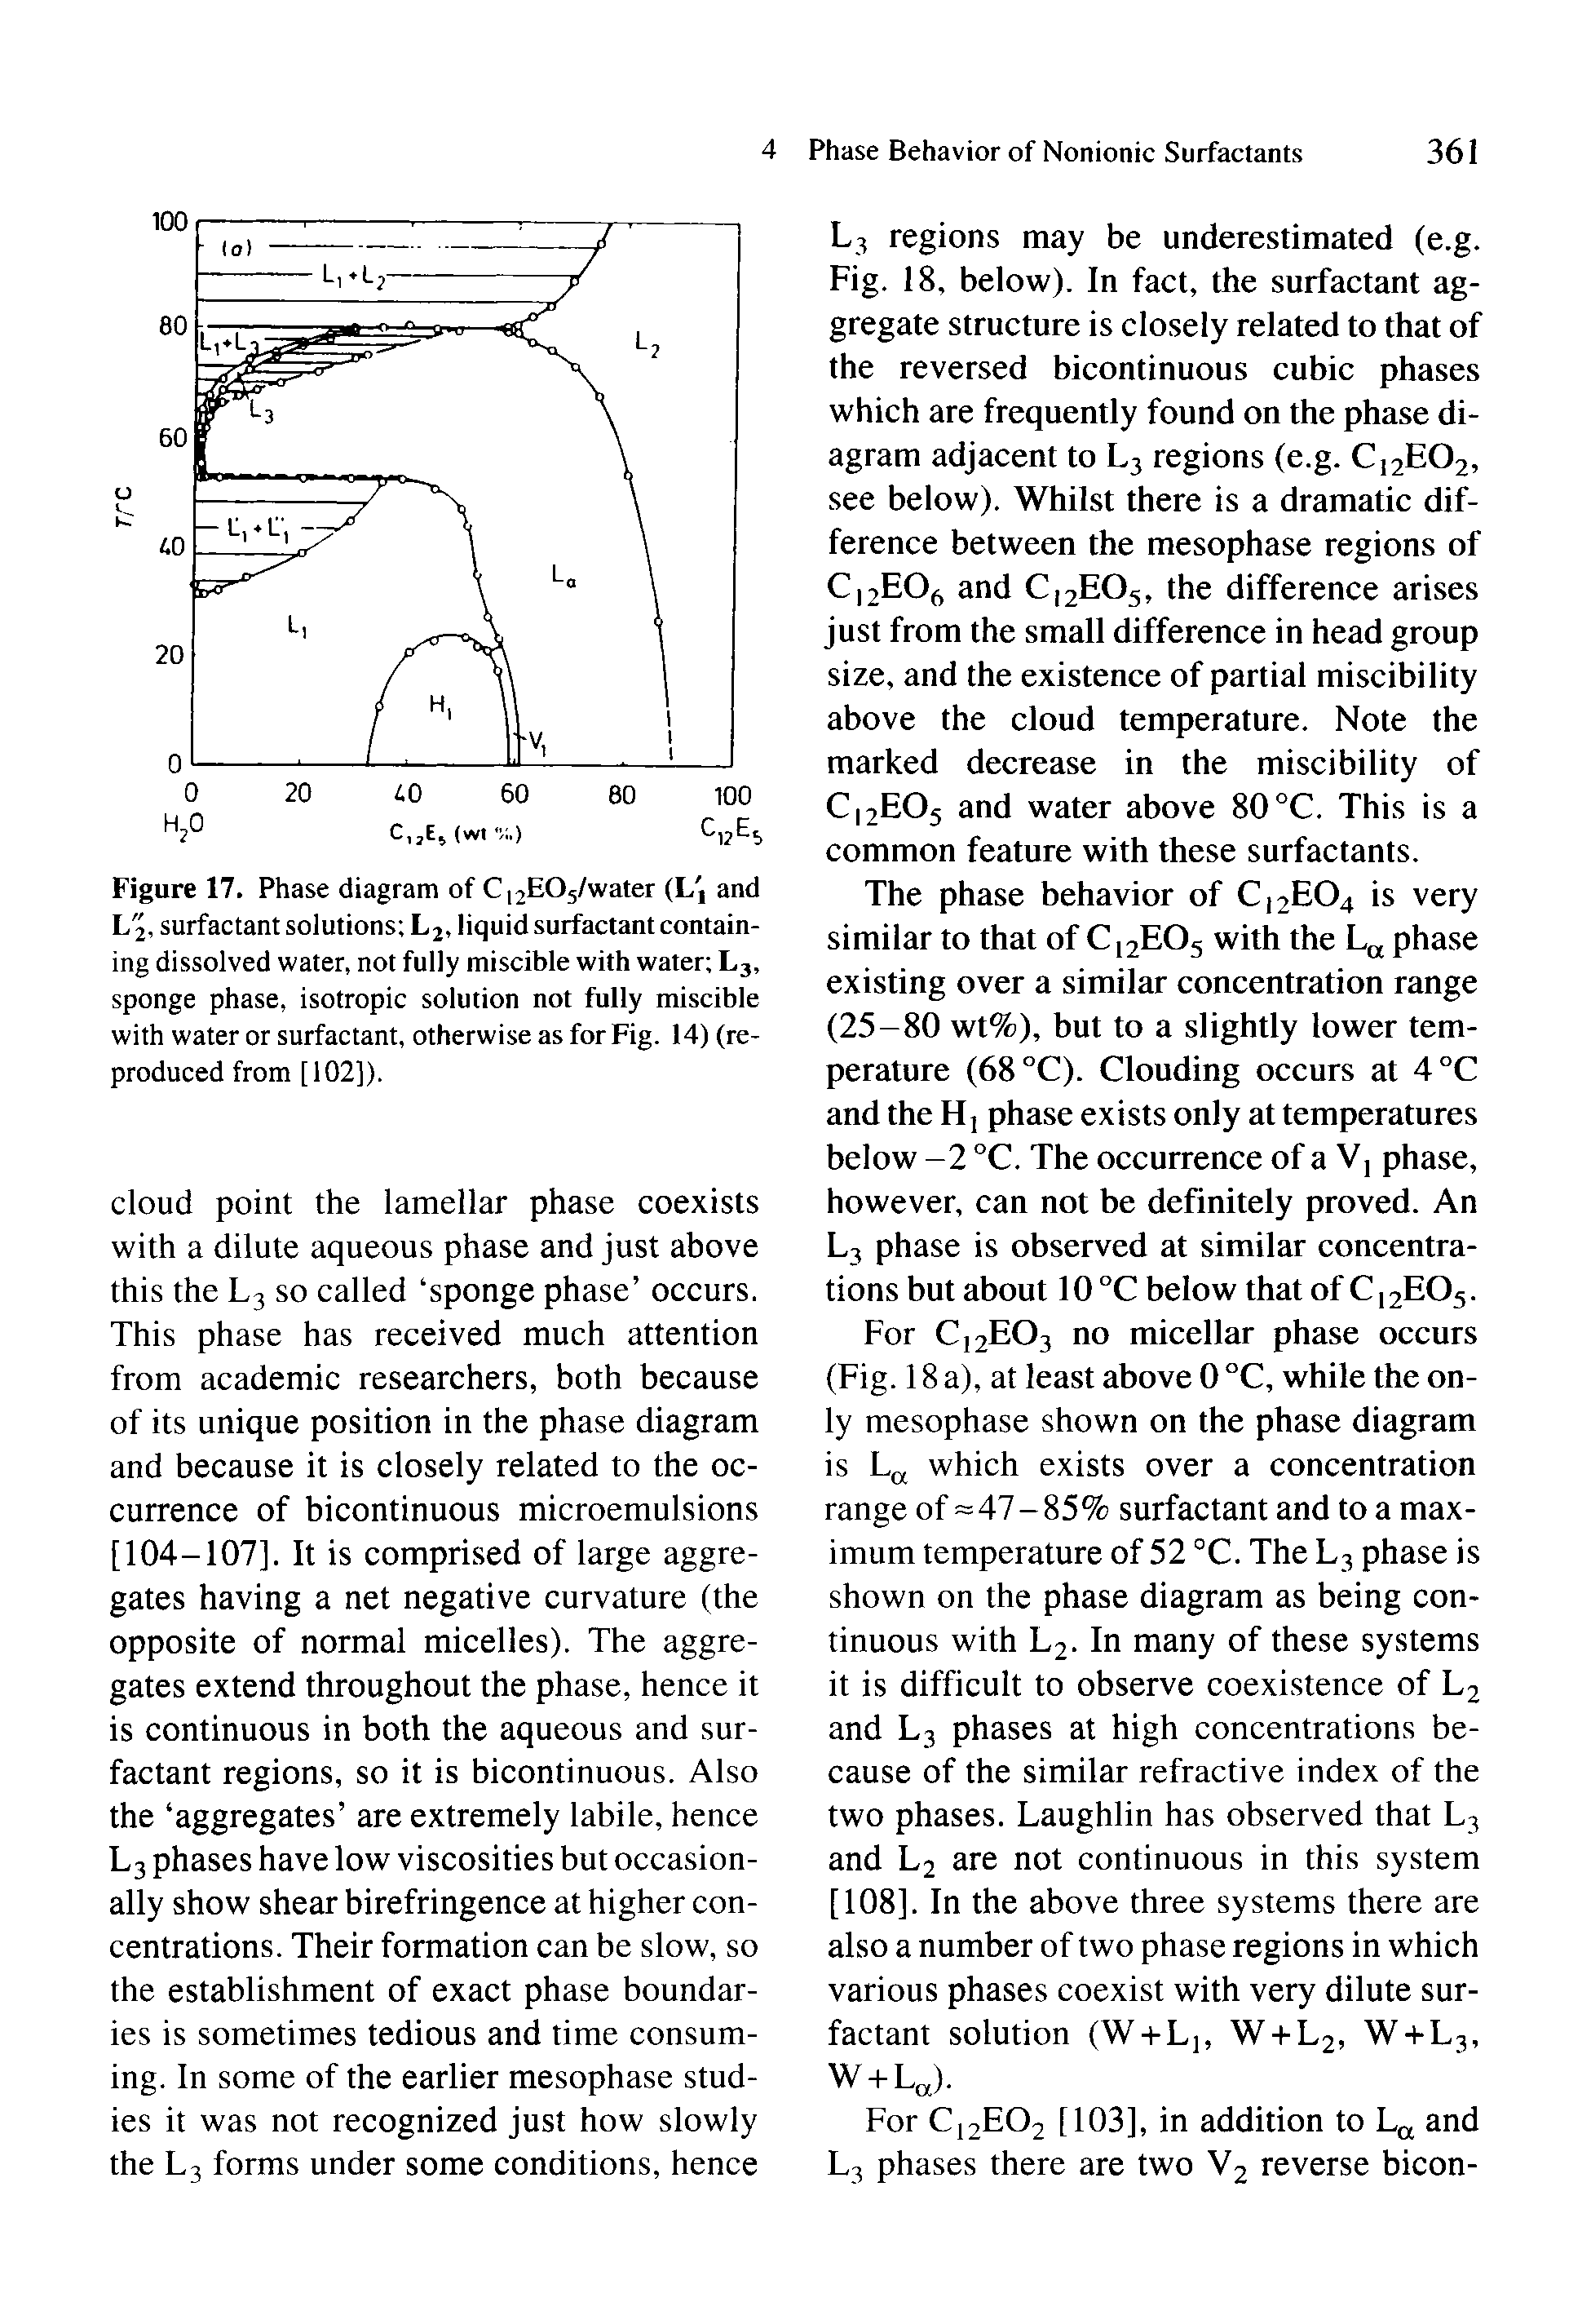 Figure 17. Phase diagram of C,2E05/water (L and L 2, surfactant solutions L2, liquid surfactant containing dissolved water, not fully miscible with water L3, sponge phase, isotropic solution not fully miscible with water or surfactant, otherwise as for Fig. 14) (reproduced from [102]).